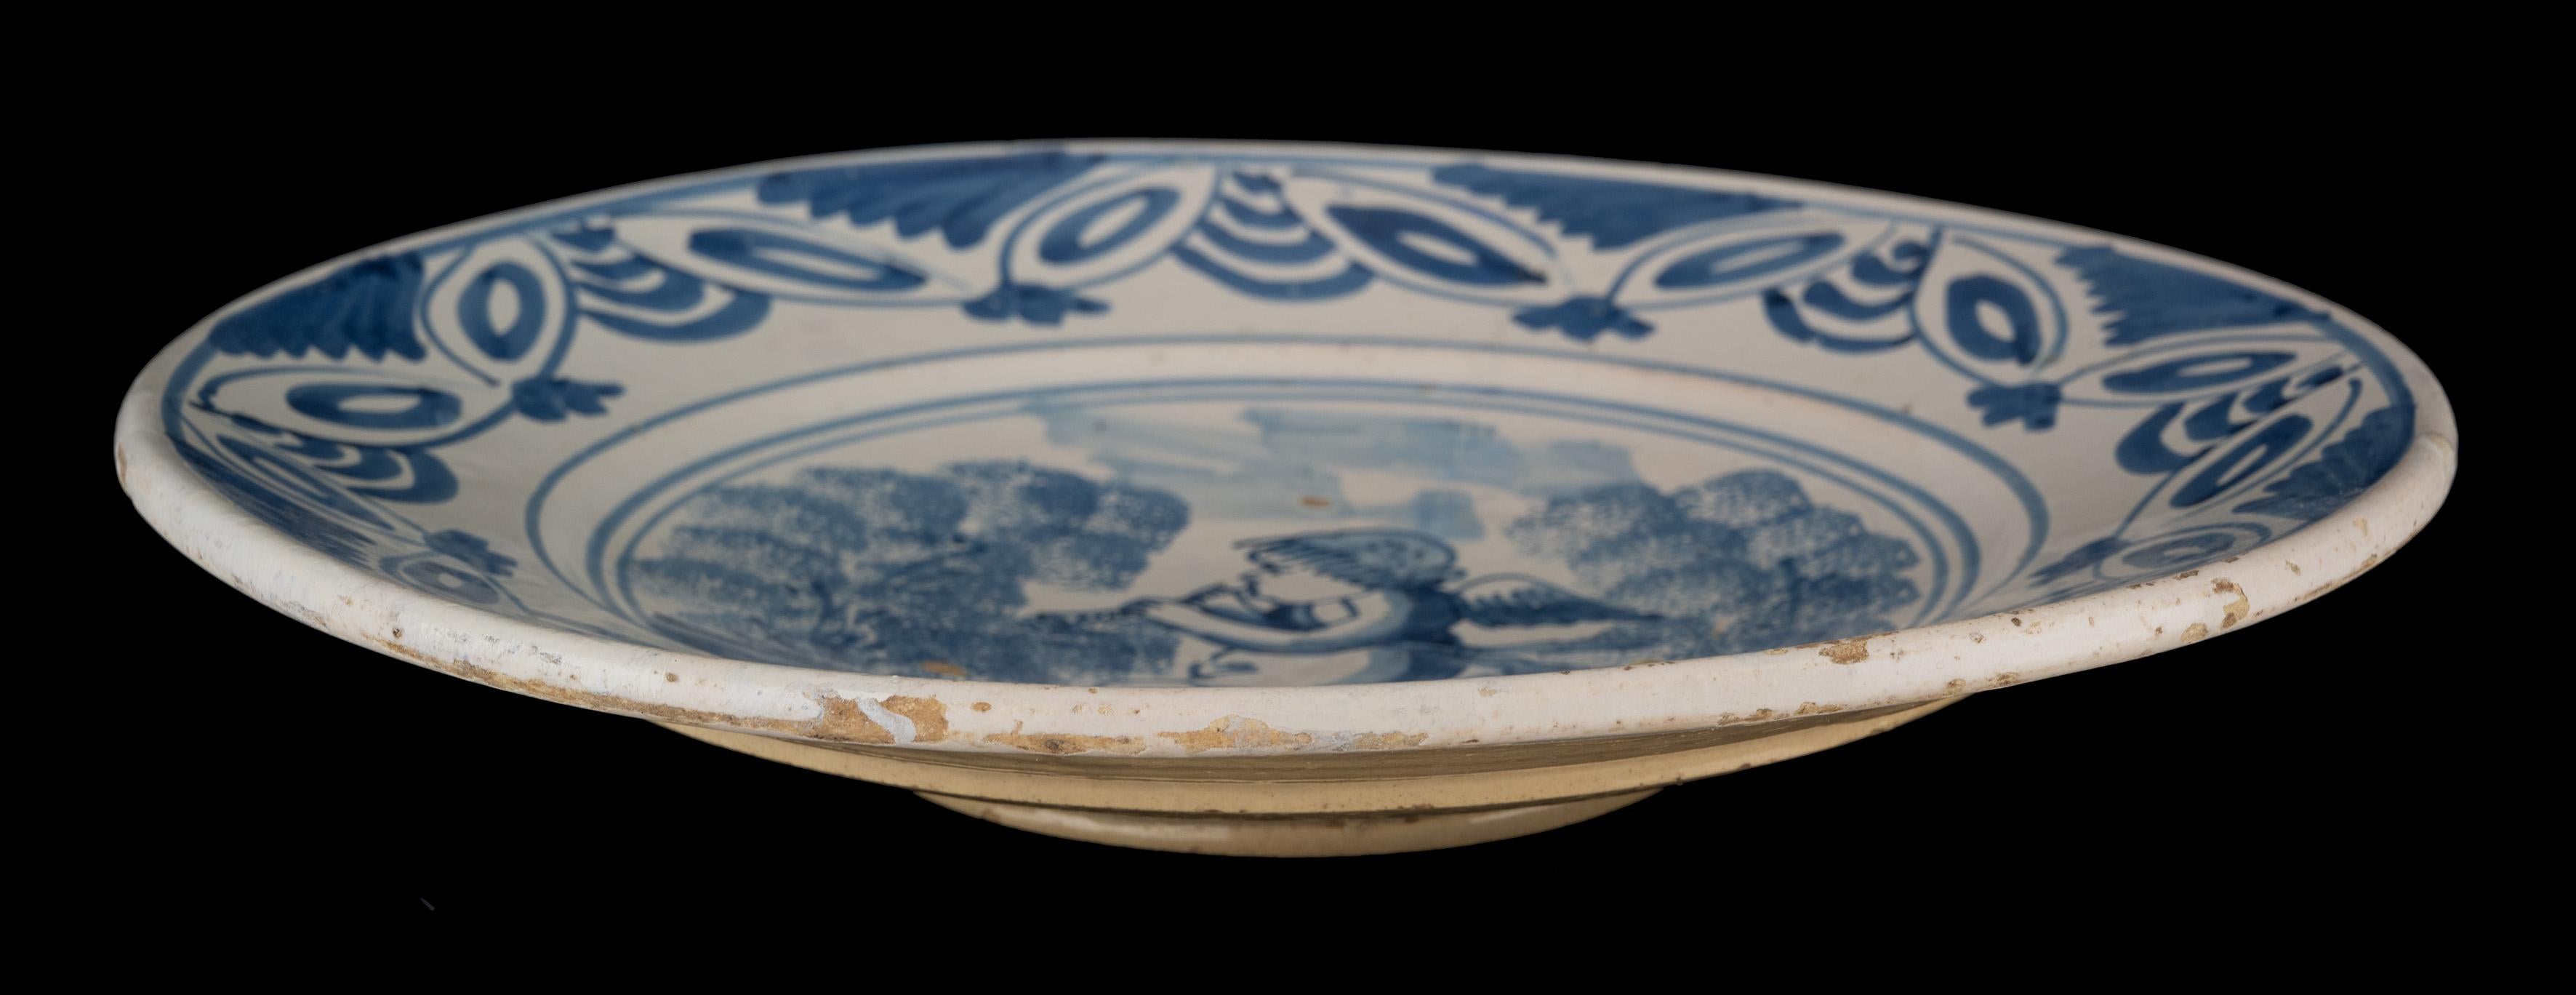 Delft Blue and White Dish with a Flute-Playing Putto, the Netherlands, 1660-1700 For Sale 1